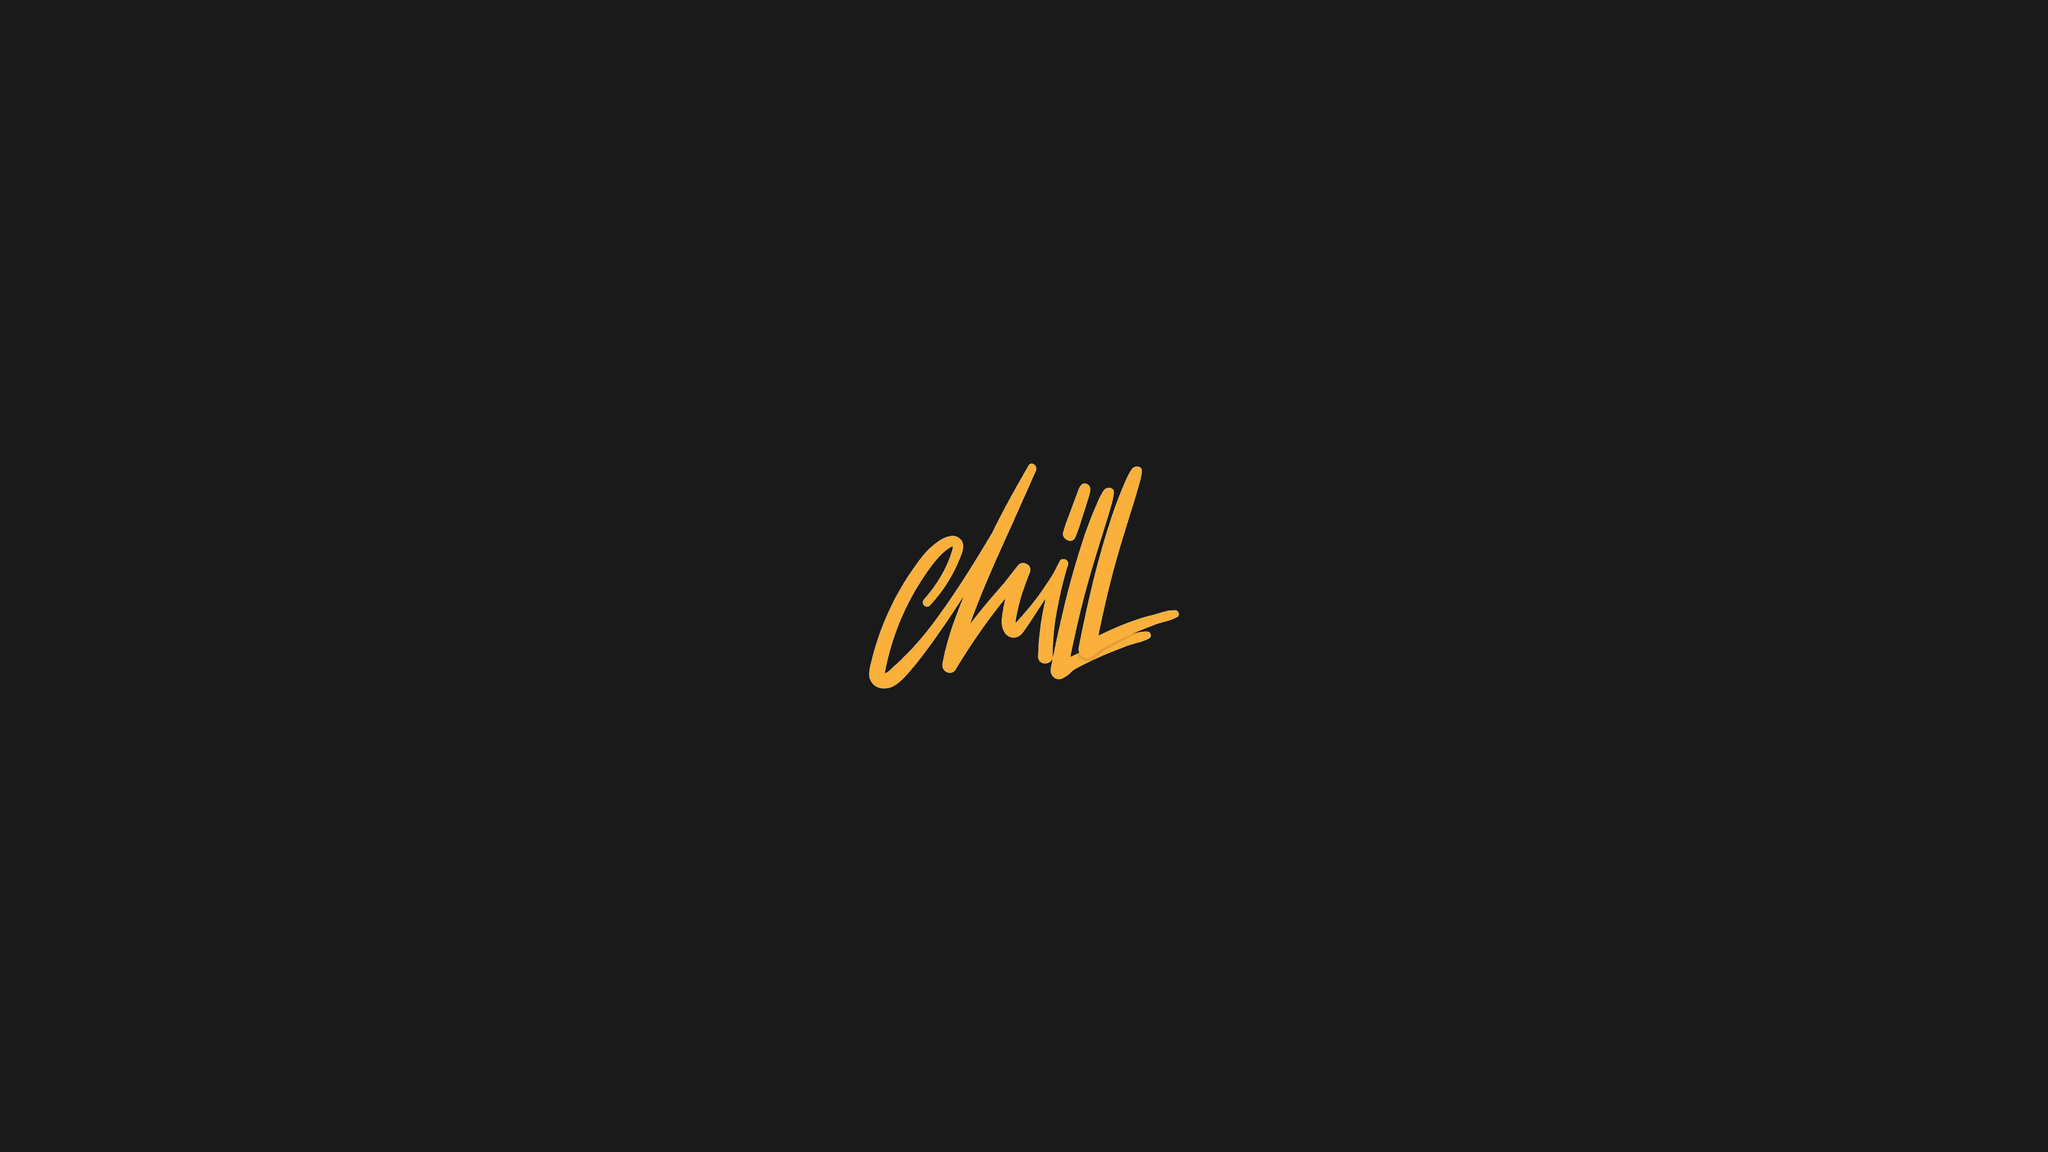 48x1152 Chill 48x1152 Resolution Hd 4k Wallpapers Images Backgrounds Photos And Pictures